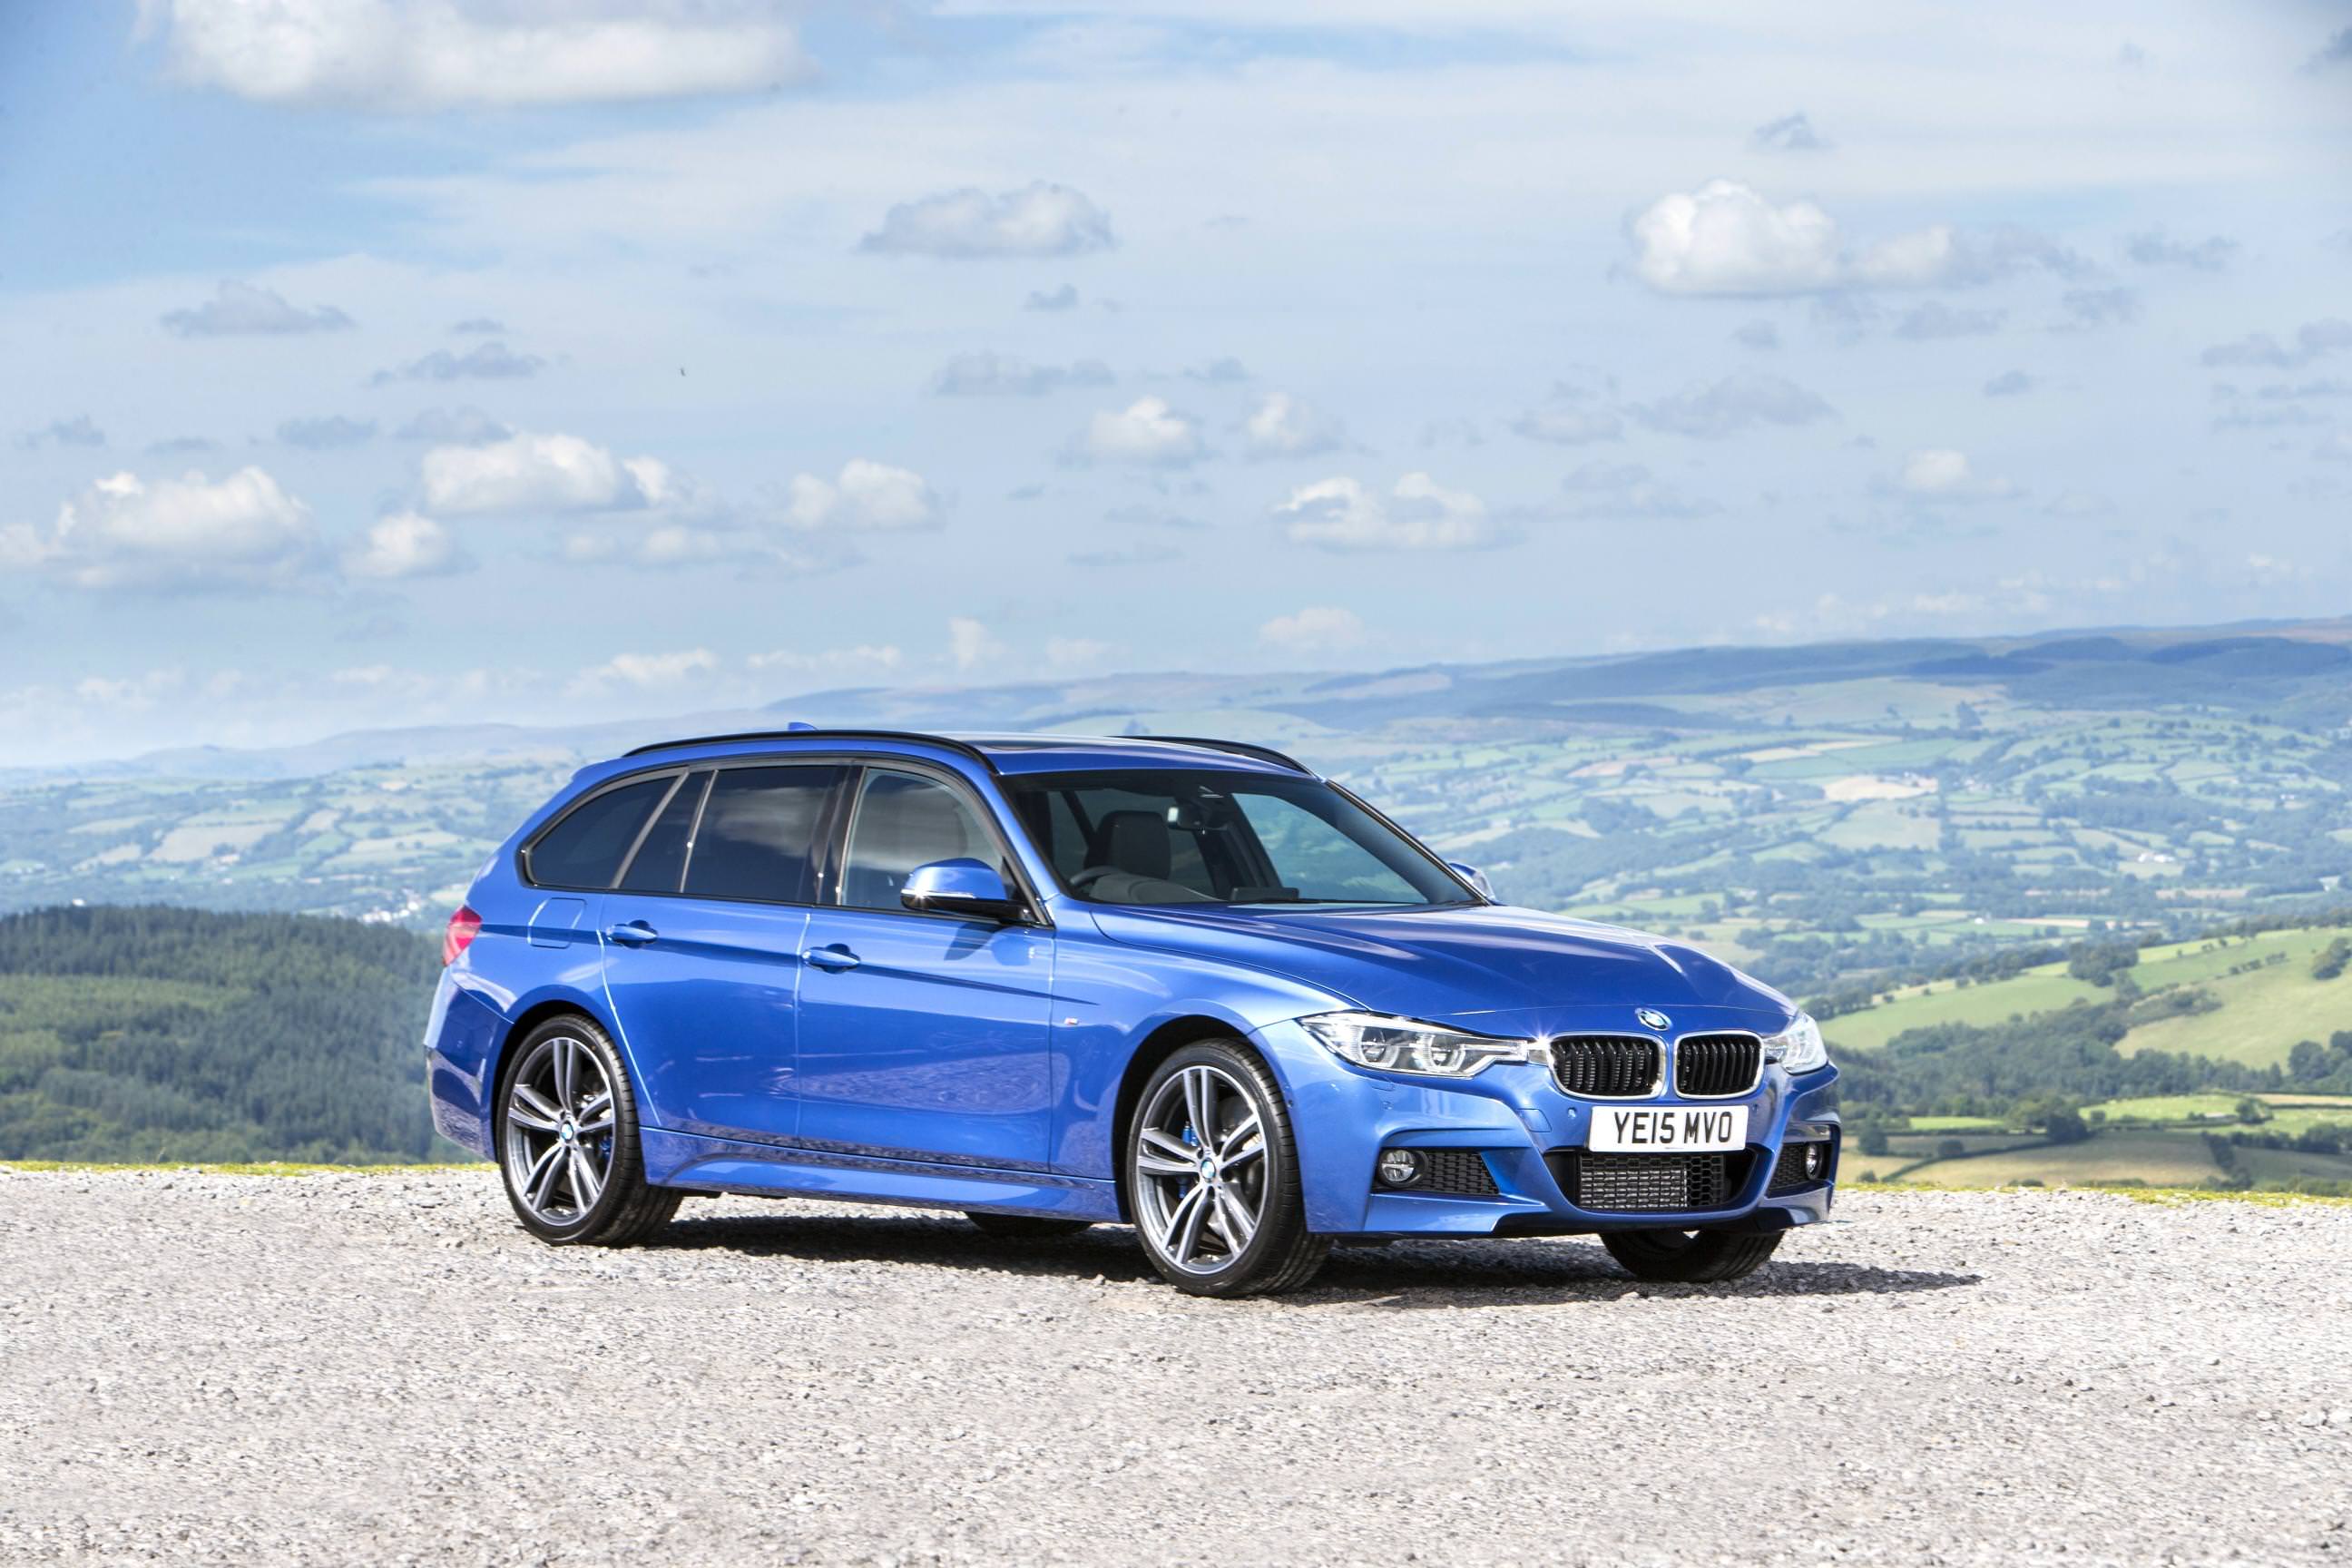 image of a blue bmw 3 series touring xdrive car exterior